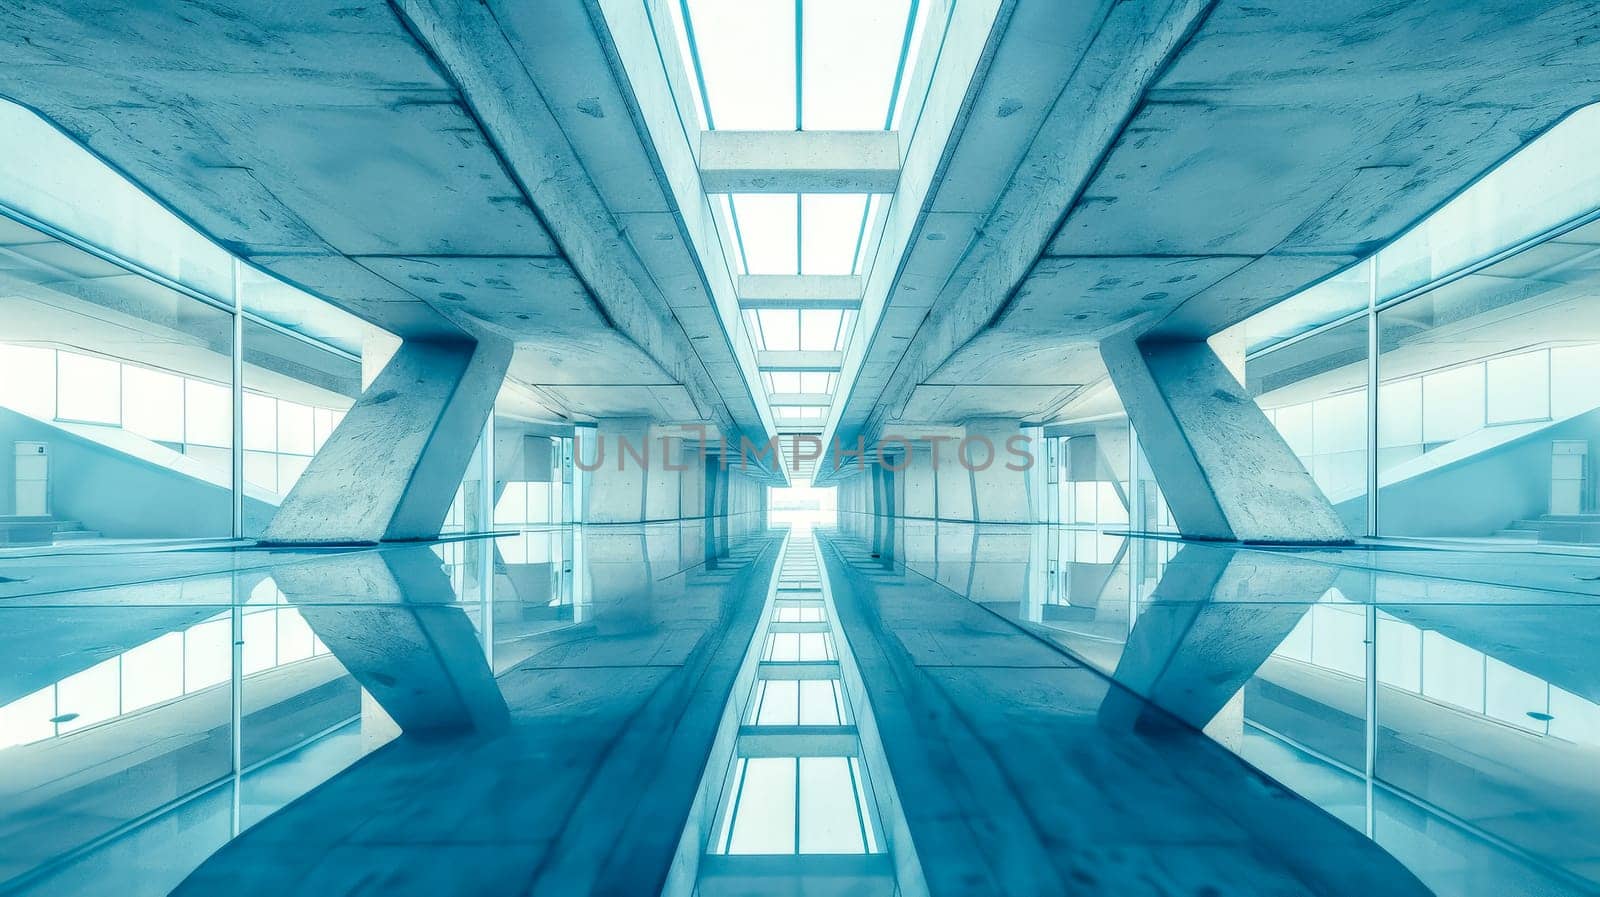 Symmetrical view of a modern architectural corridor with a cool blue tone by Edophoto